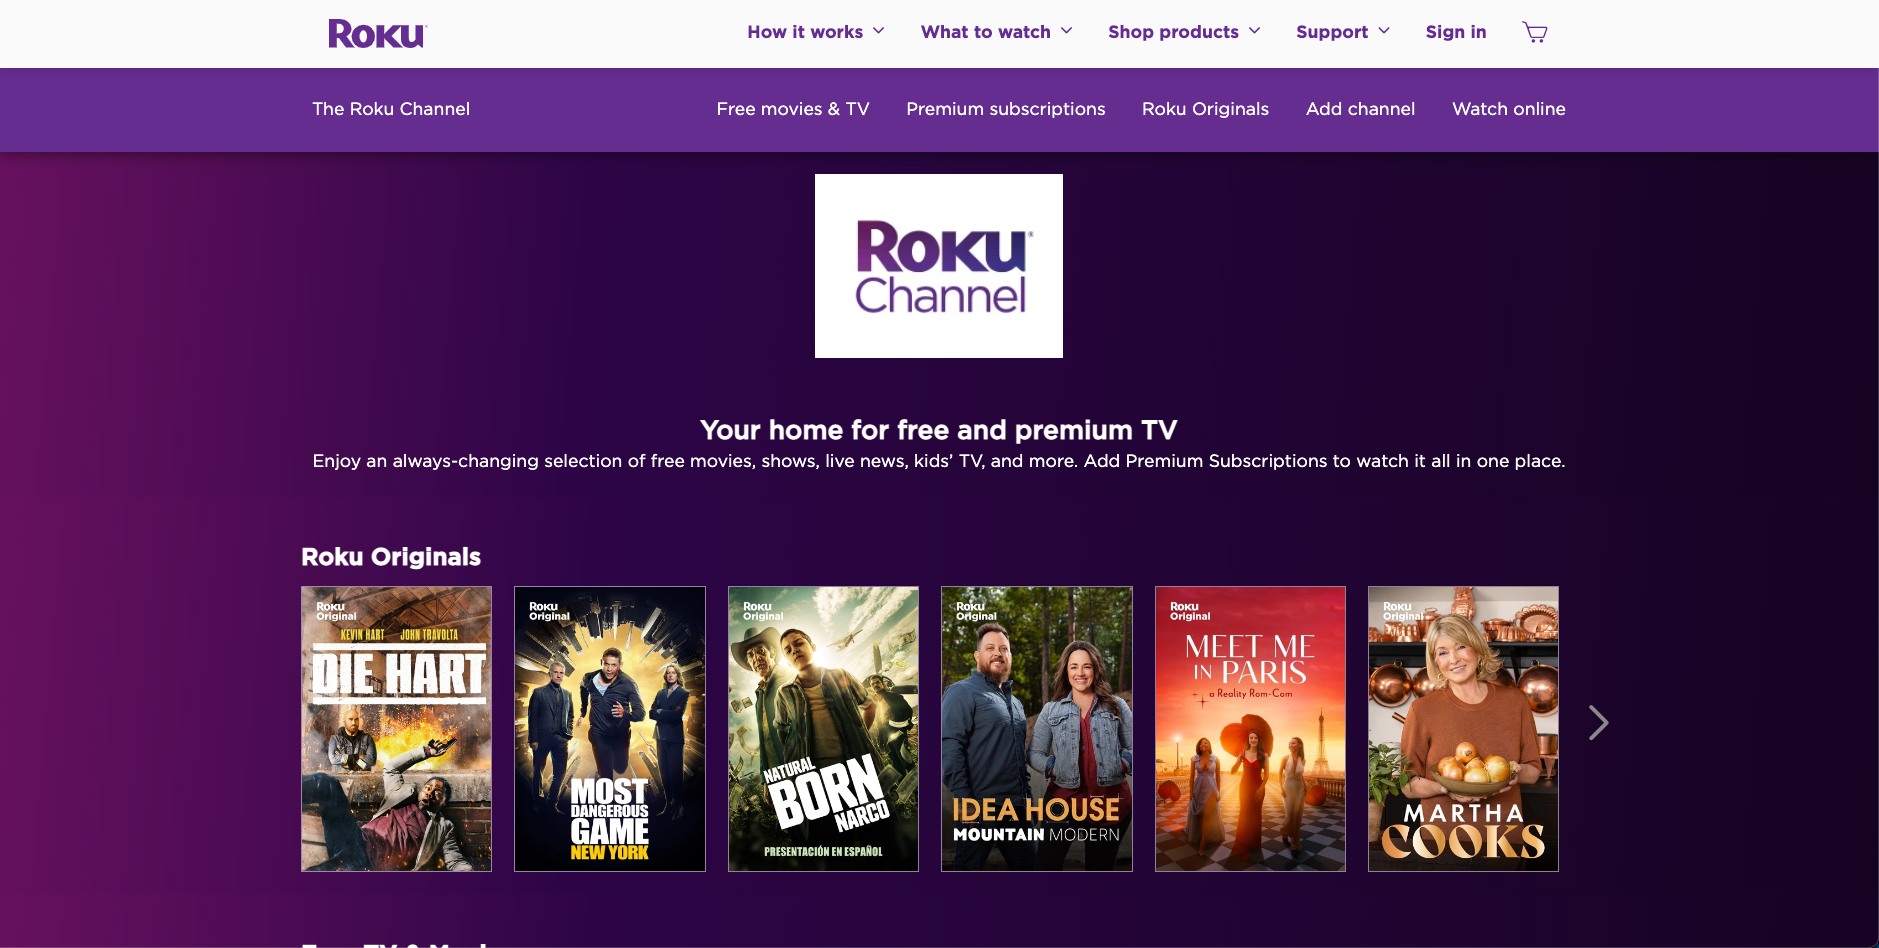 Remote.tools shares a list of websites to watch free movies. The Roku Channel is a free movie streaming website that offers a vast collection of movies and TV shows.